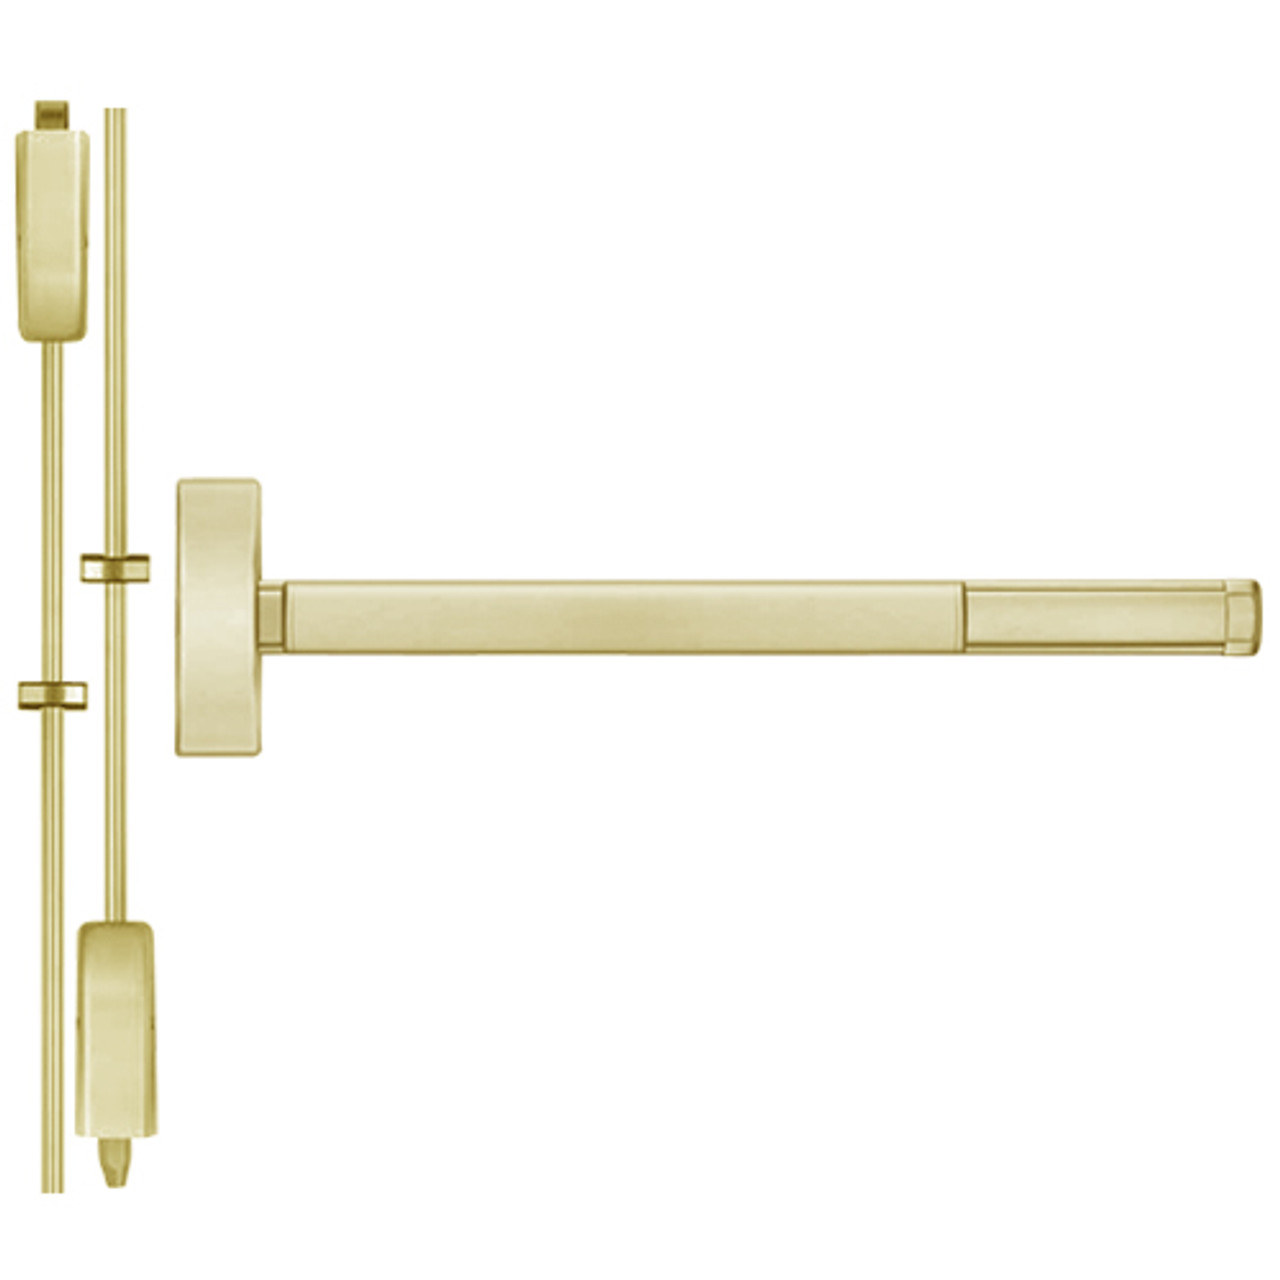 DEFL2203-606-48 PHI 2200 Series Fire Rated Apex Surface Vertical Rod Device with Delayed Egress Prepped for Key Retracts Latchbolt in Satin Brass Finish